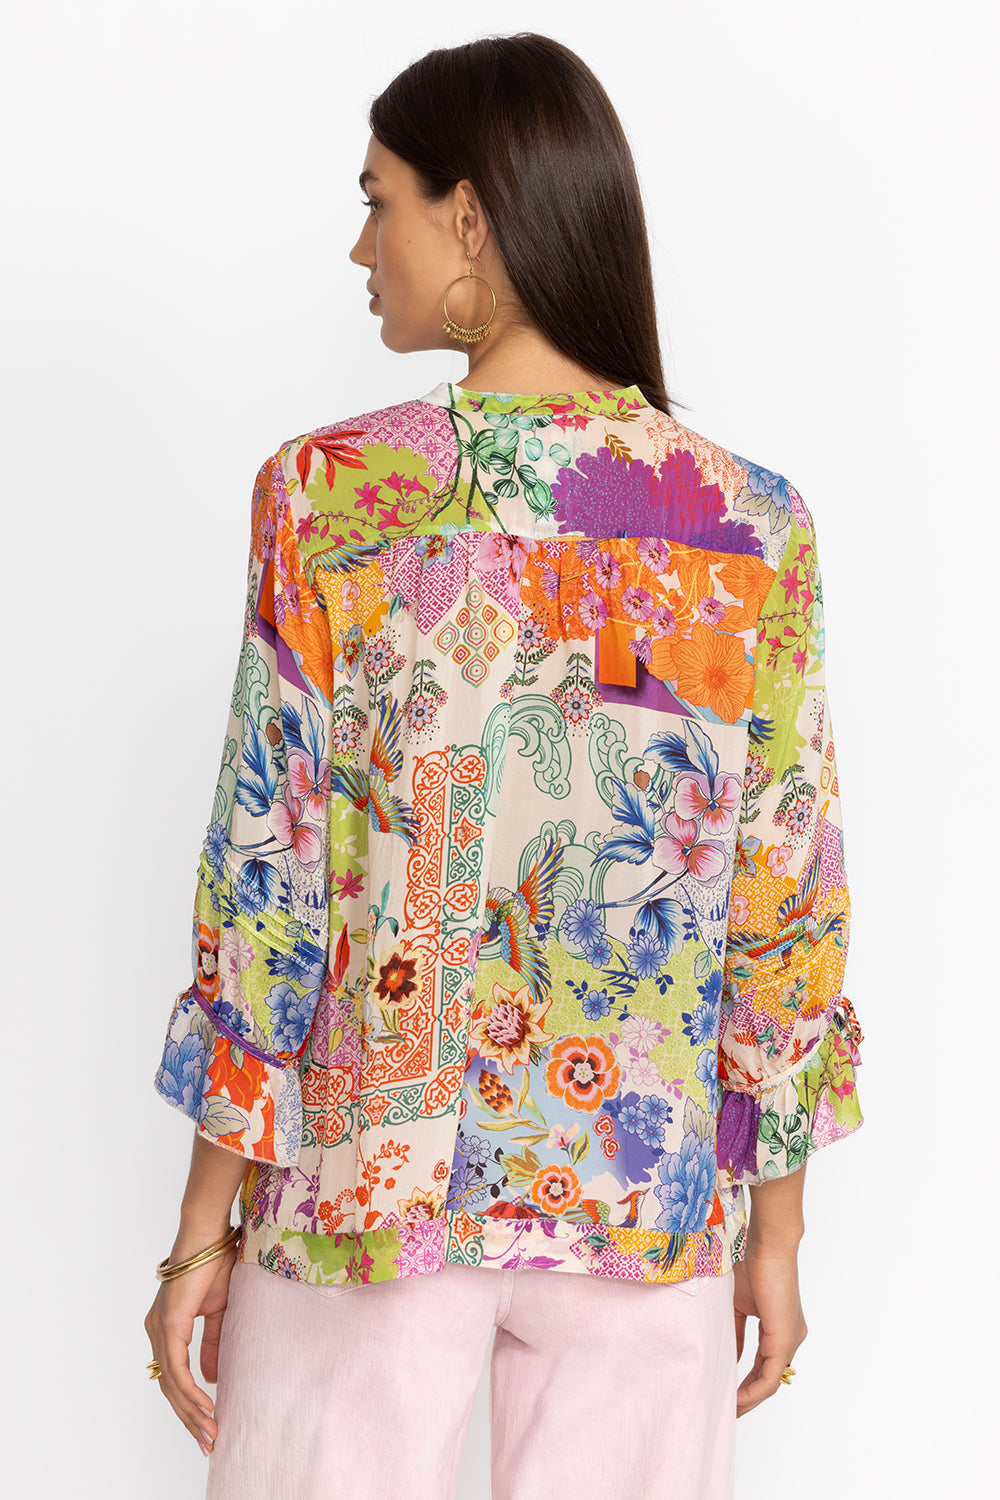 Johnny Was Vacanza Blouse - Mcdreamer C13724B4